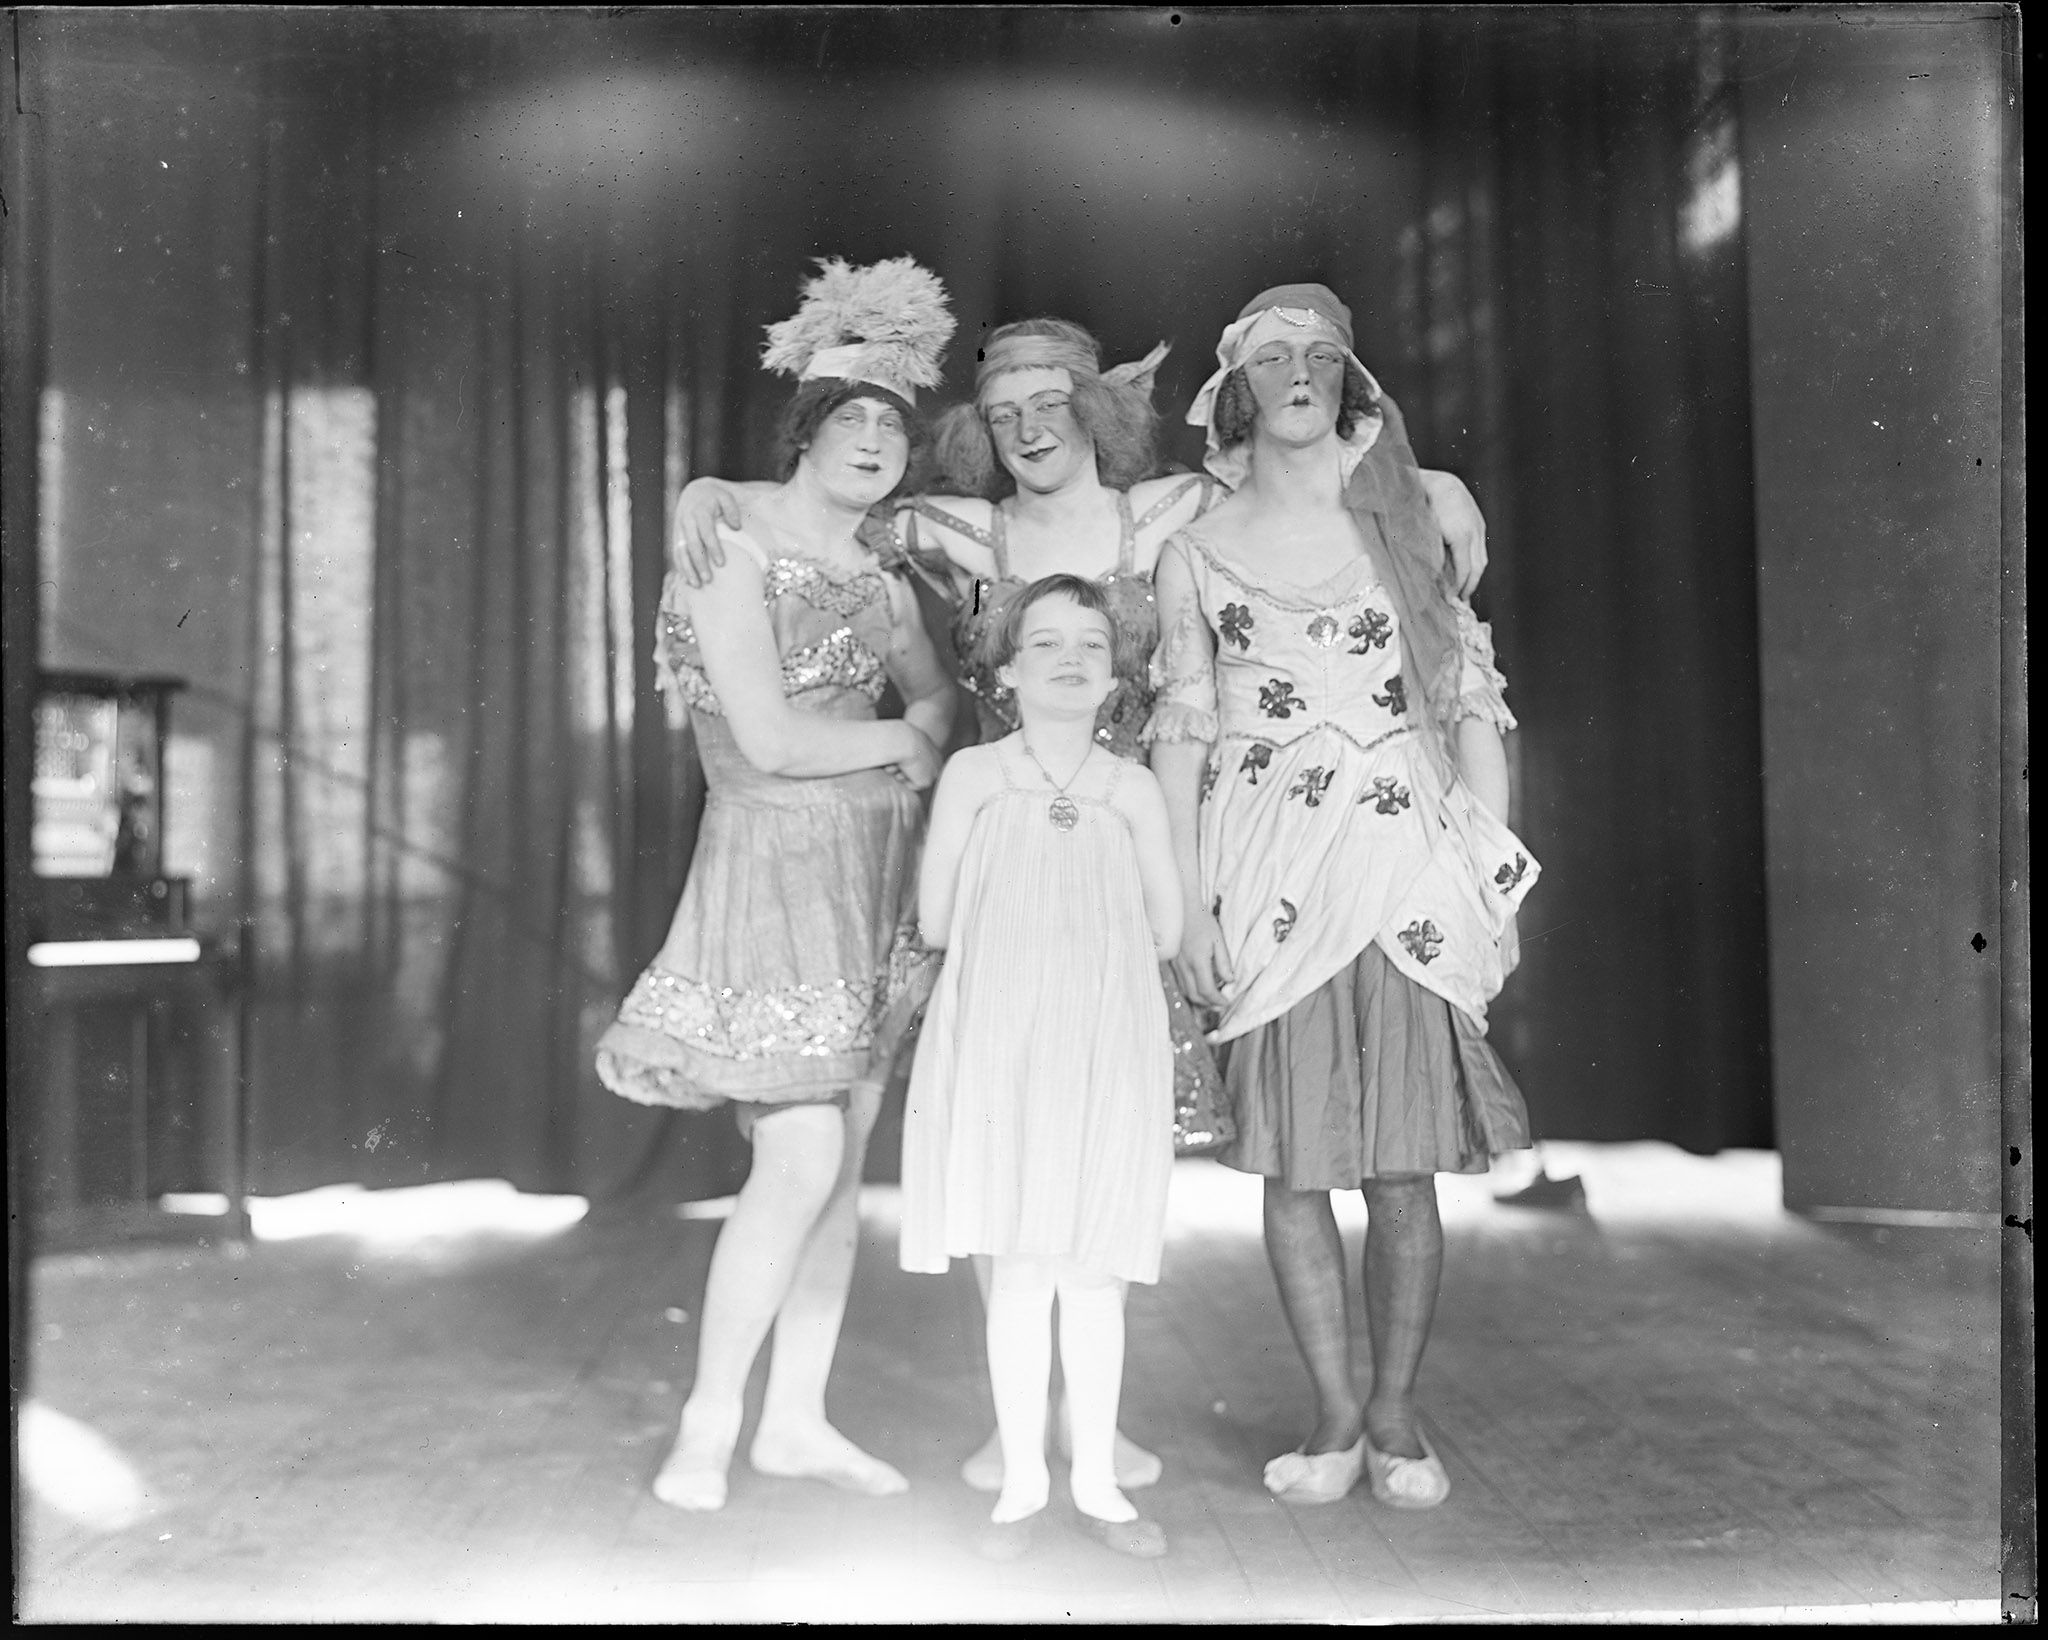 A trio of soldiers in drag pose for a picture with a child attendee.